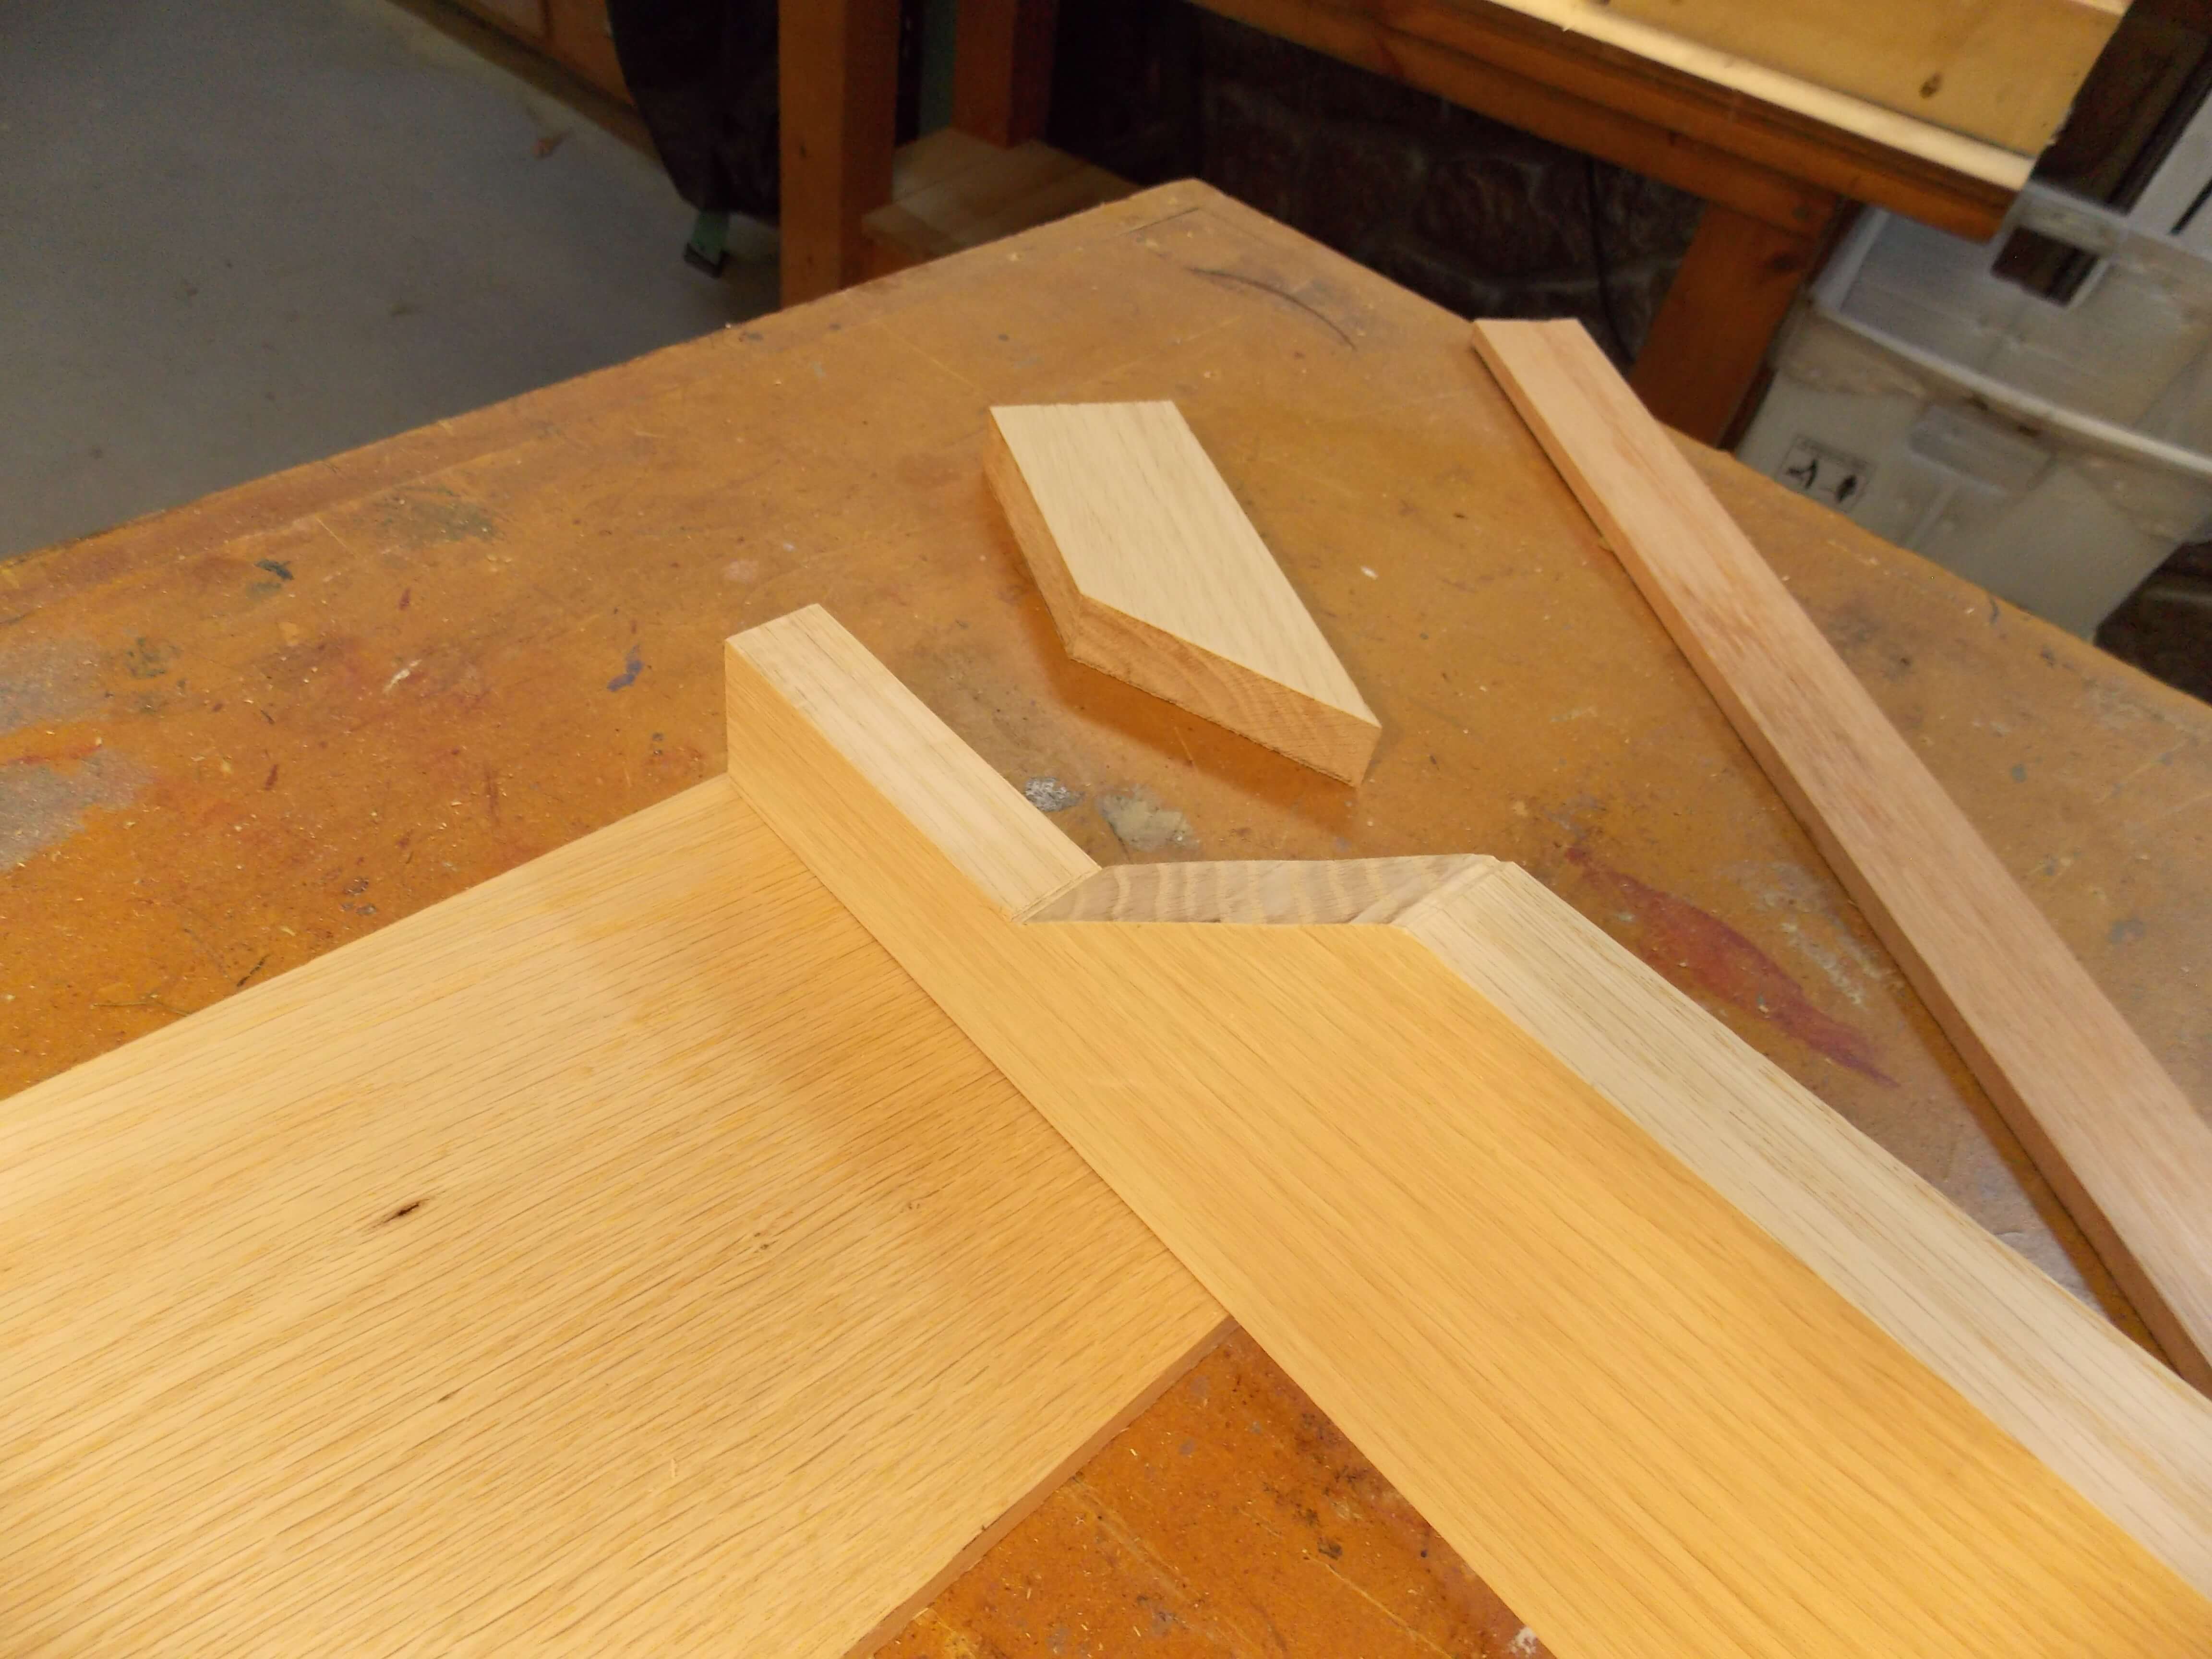 Taper the corners of your wood pieces for an Arts and Crafts style look